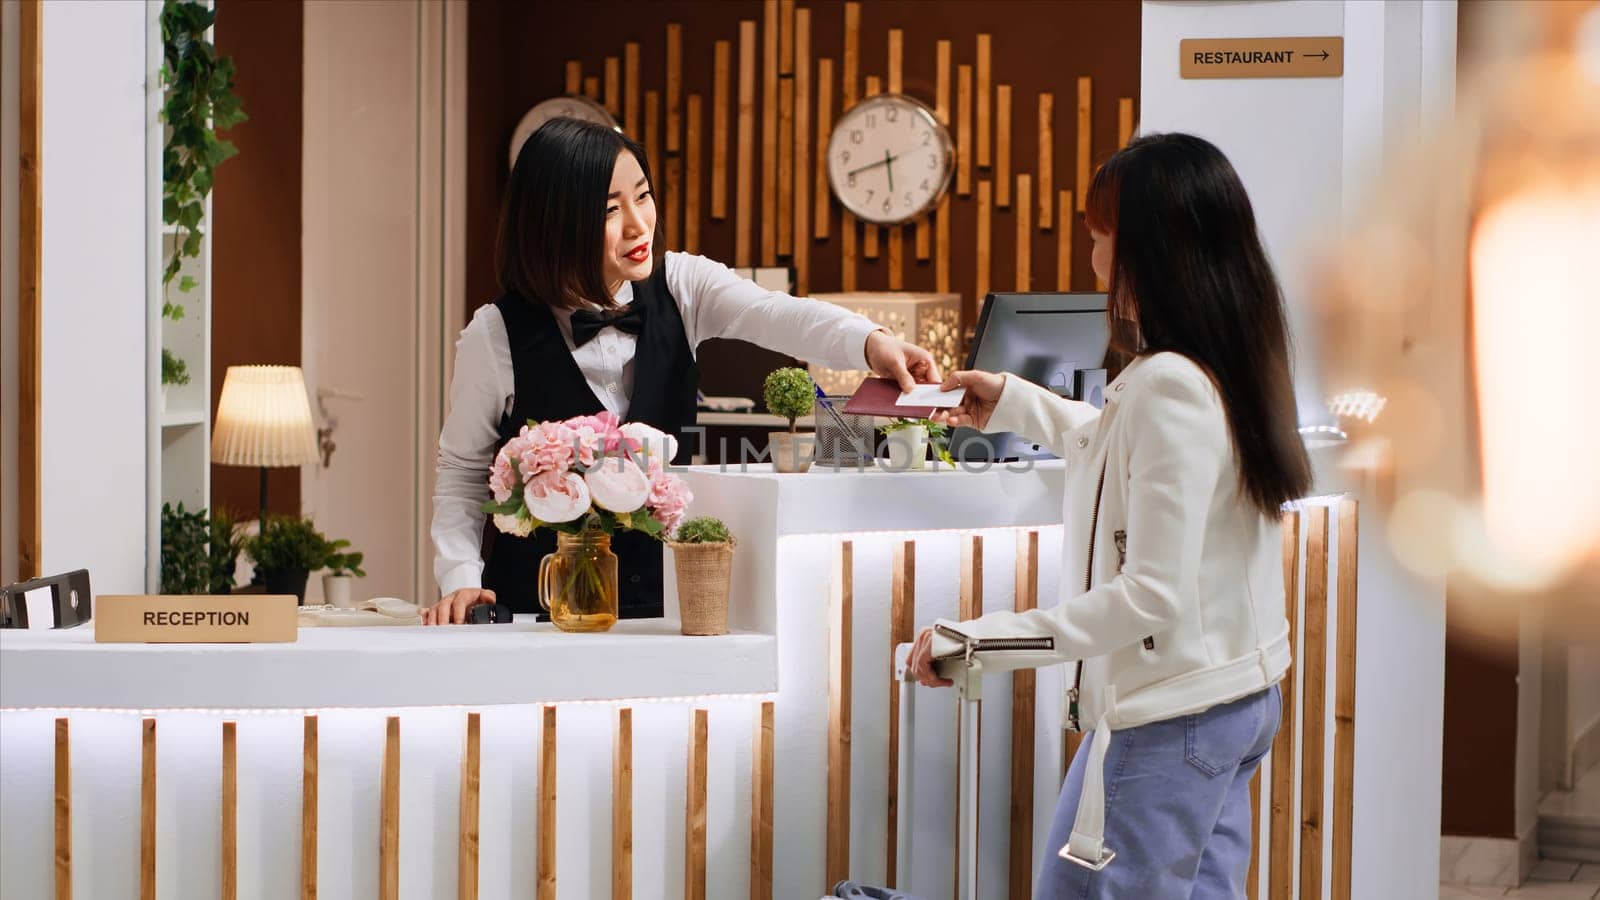 Front desk staff giving passport and access room card to client, finishing check in process and offering concierge services to asian guest. Woman receiving key and starting vacation at hotel.